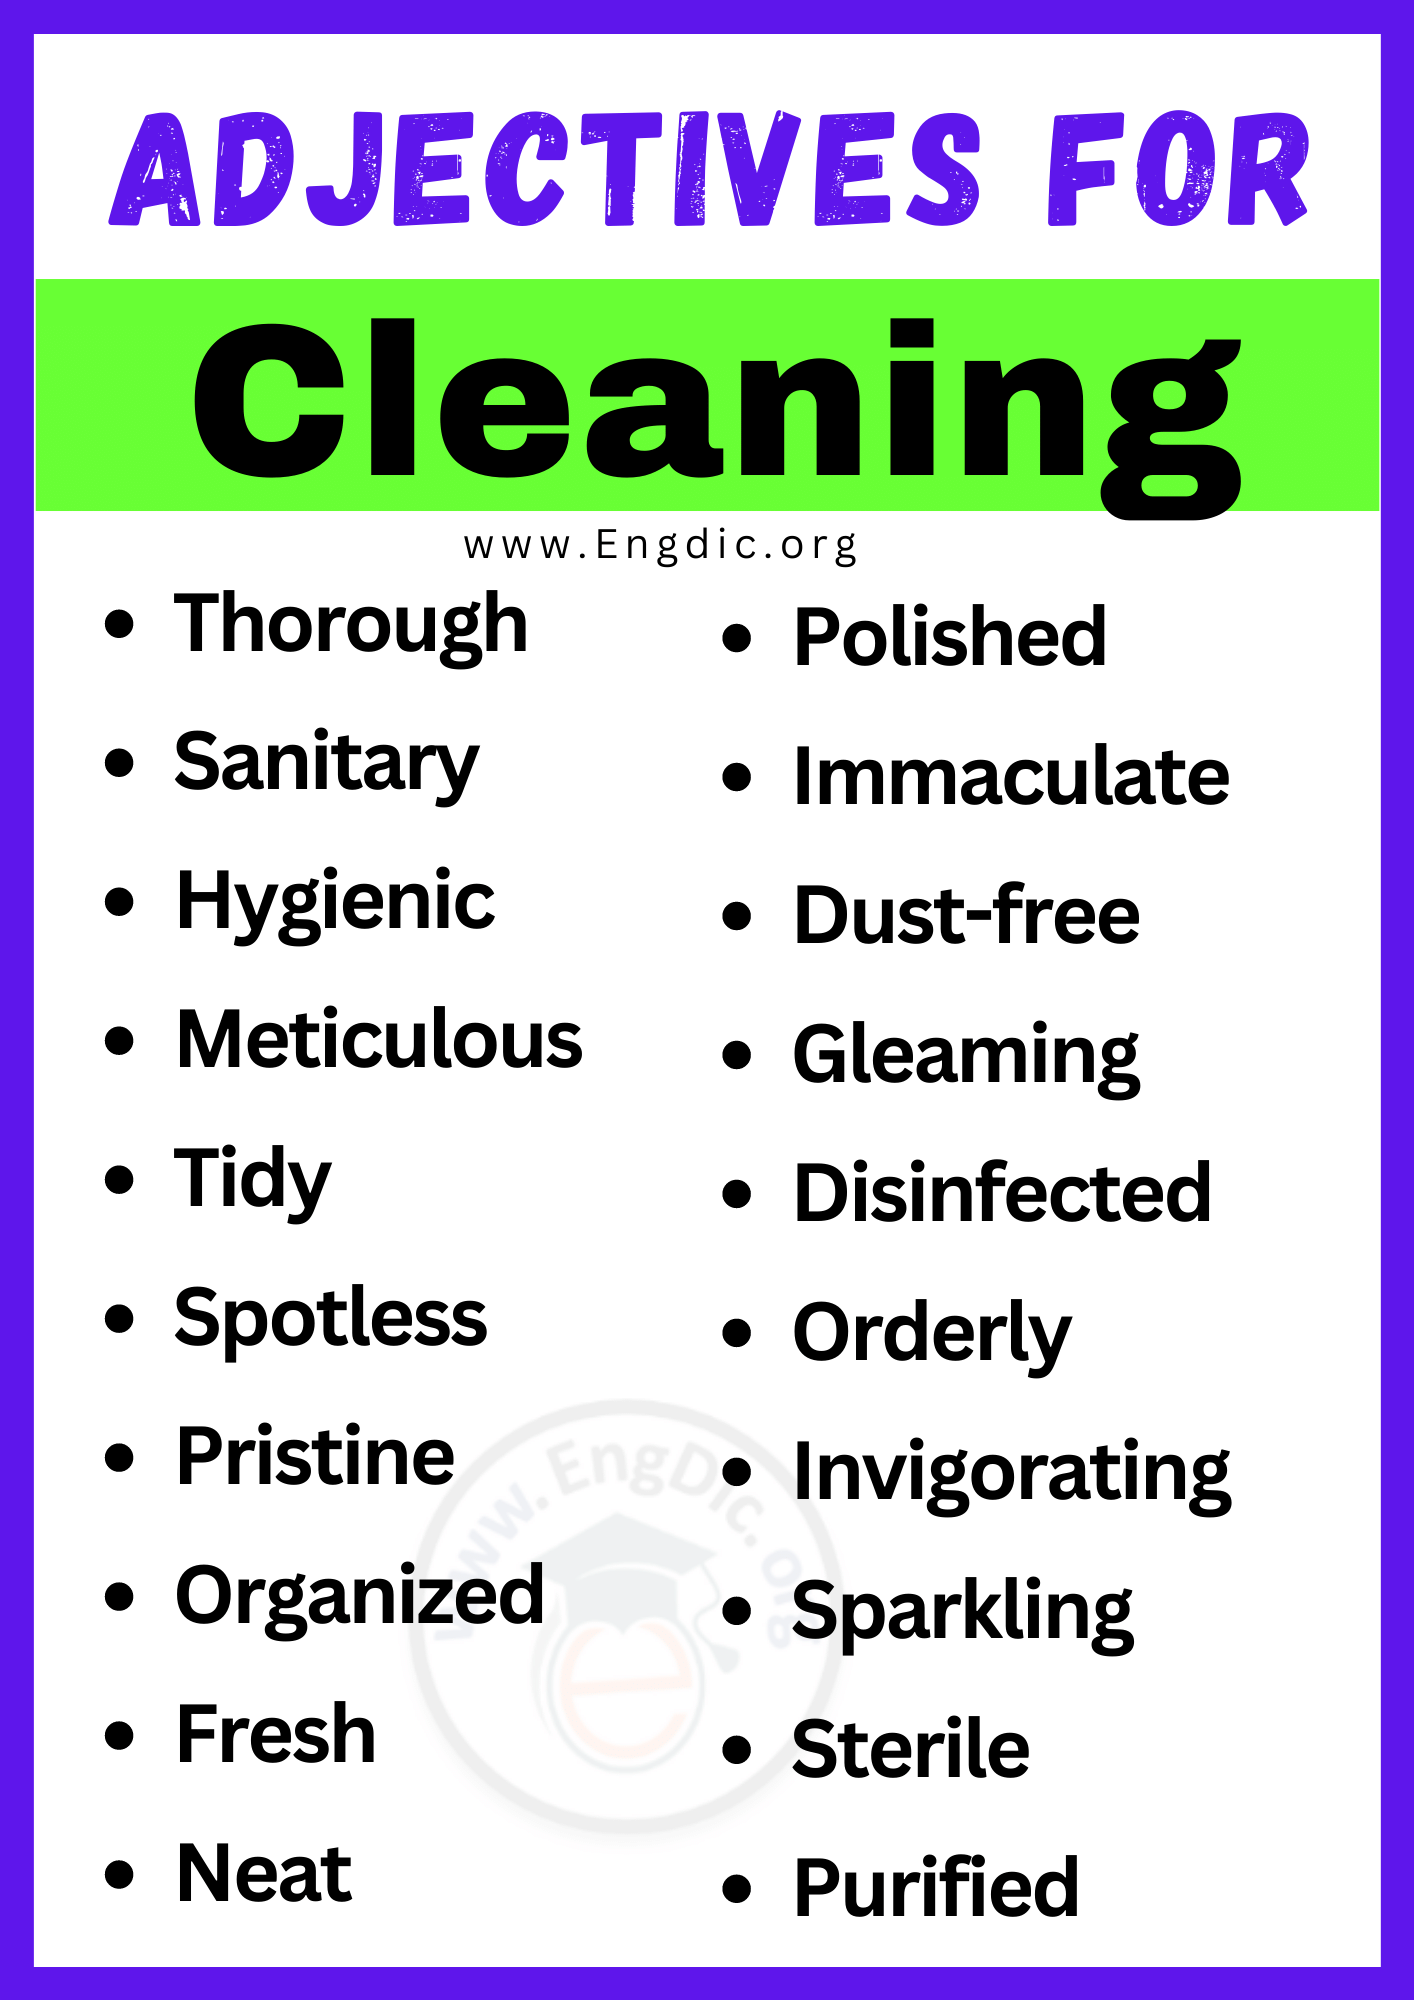 Adjectives for Cleaning